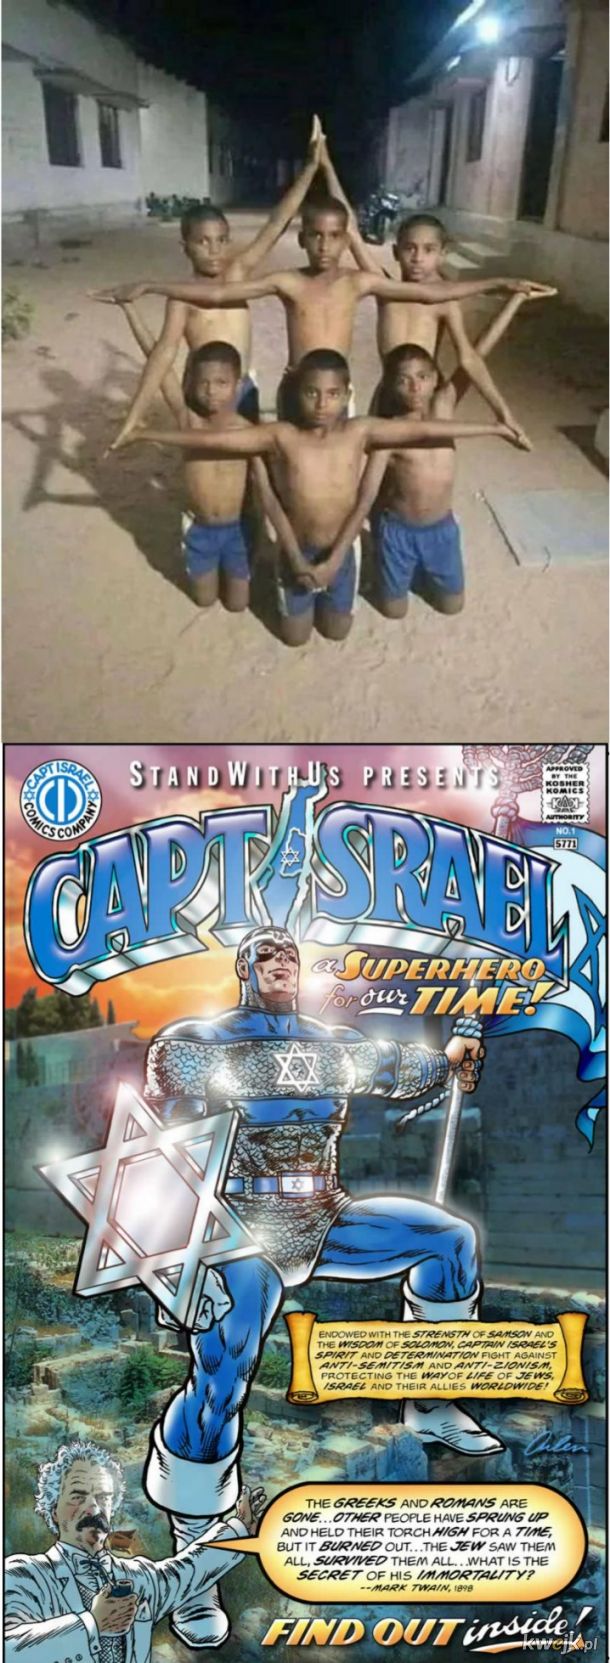 Cpt Israel